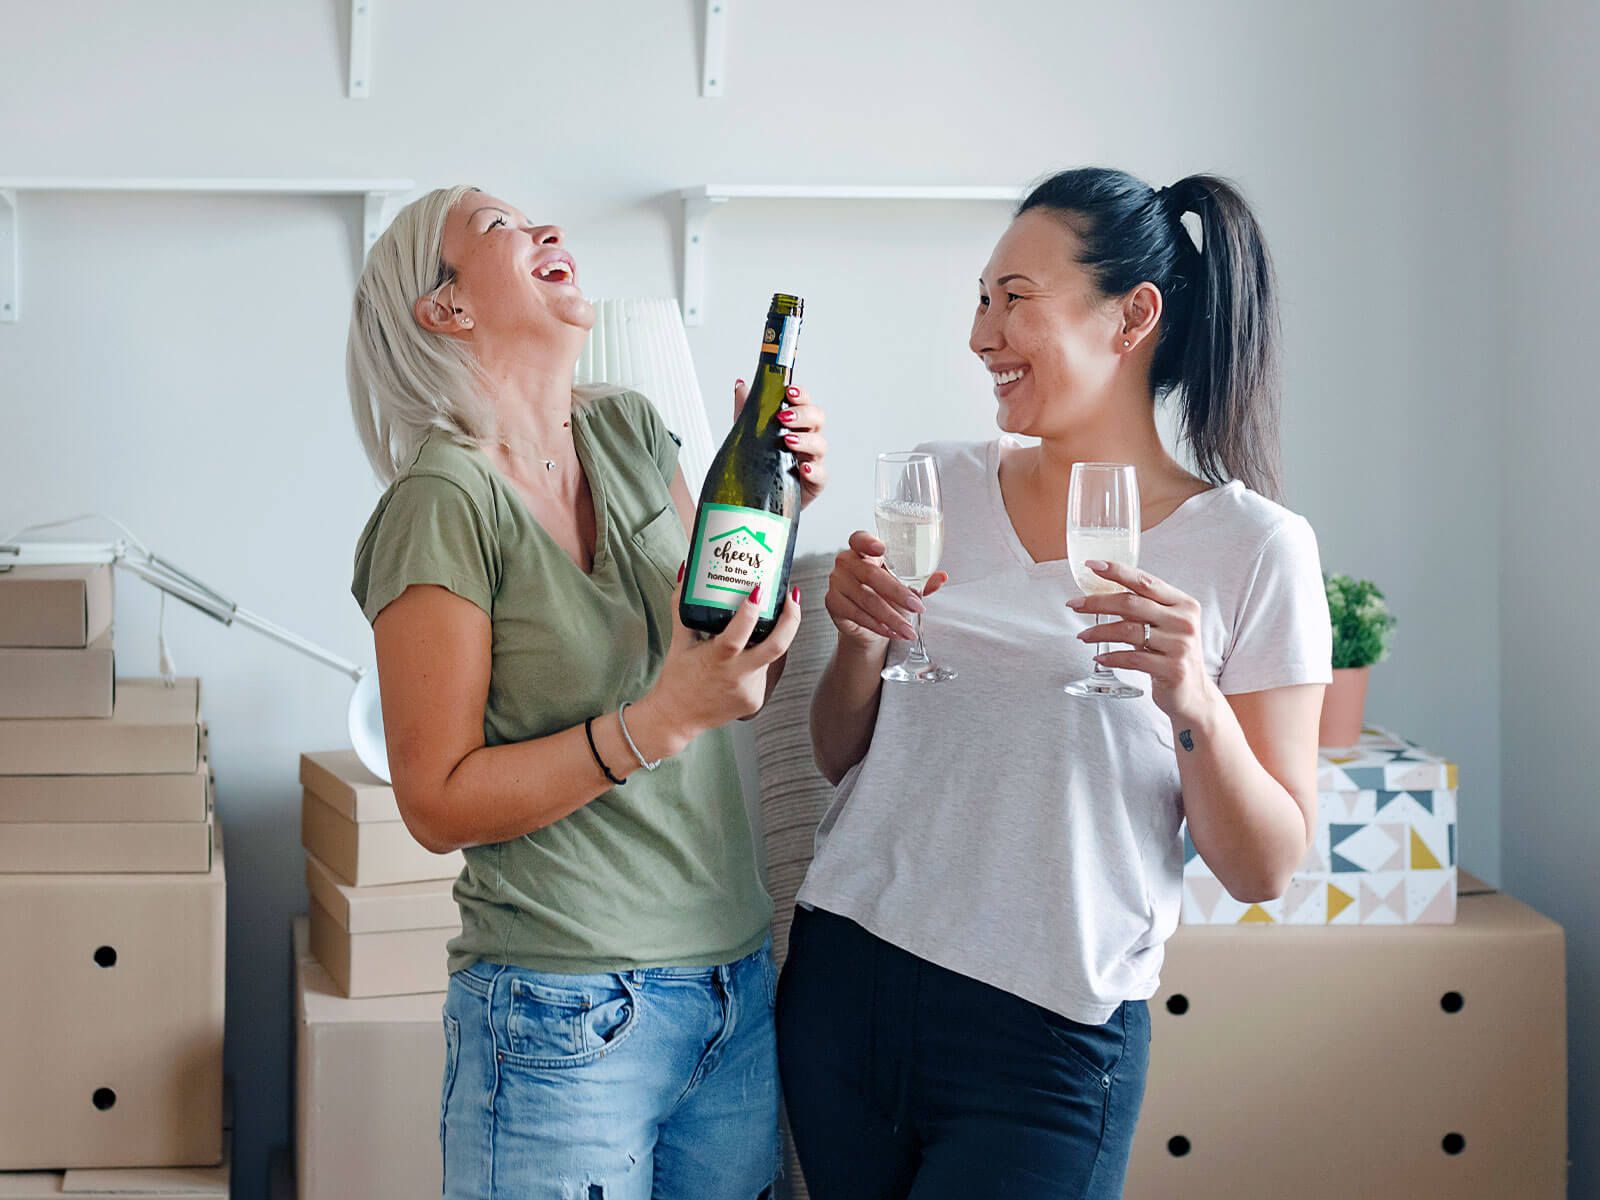 Two women holding a champagne bottle and glasses laughing with boxes in the background